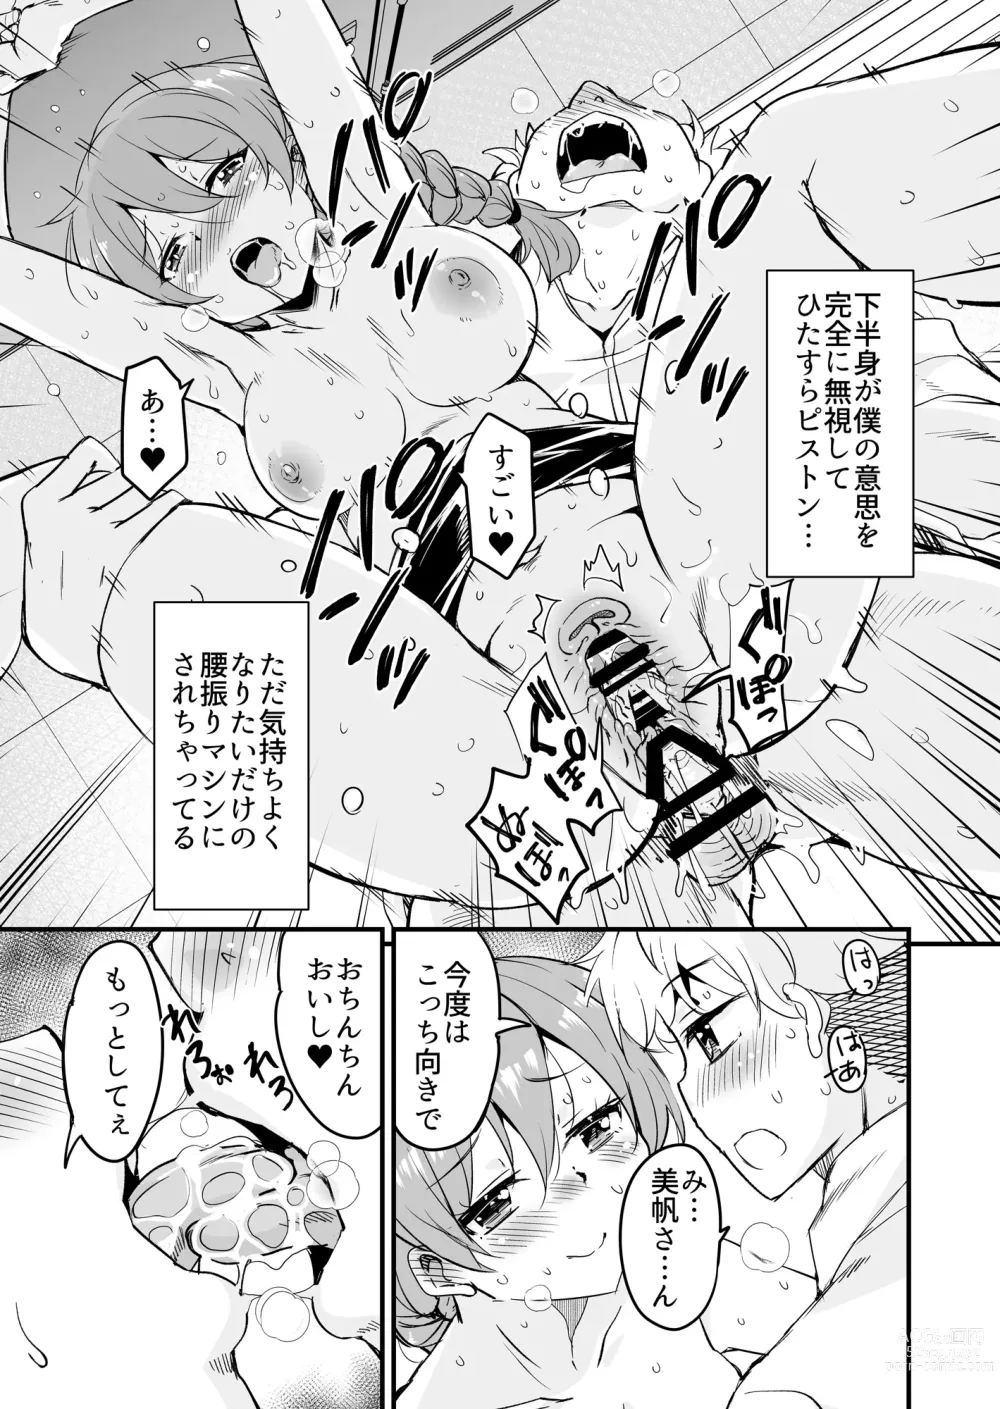 Page 19 of doujinshi 人妻店長〜娘の彼氏お借りします〜